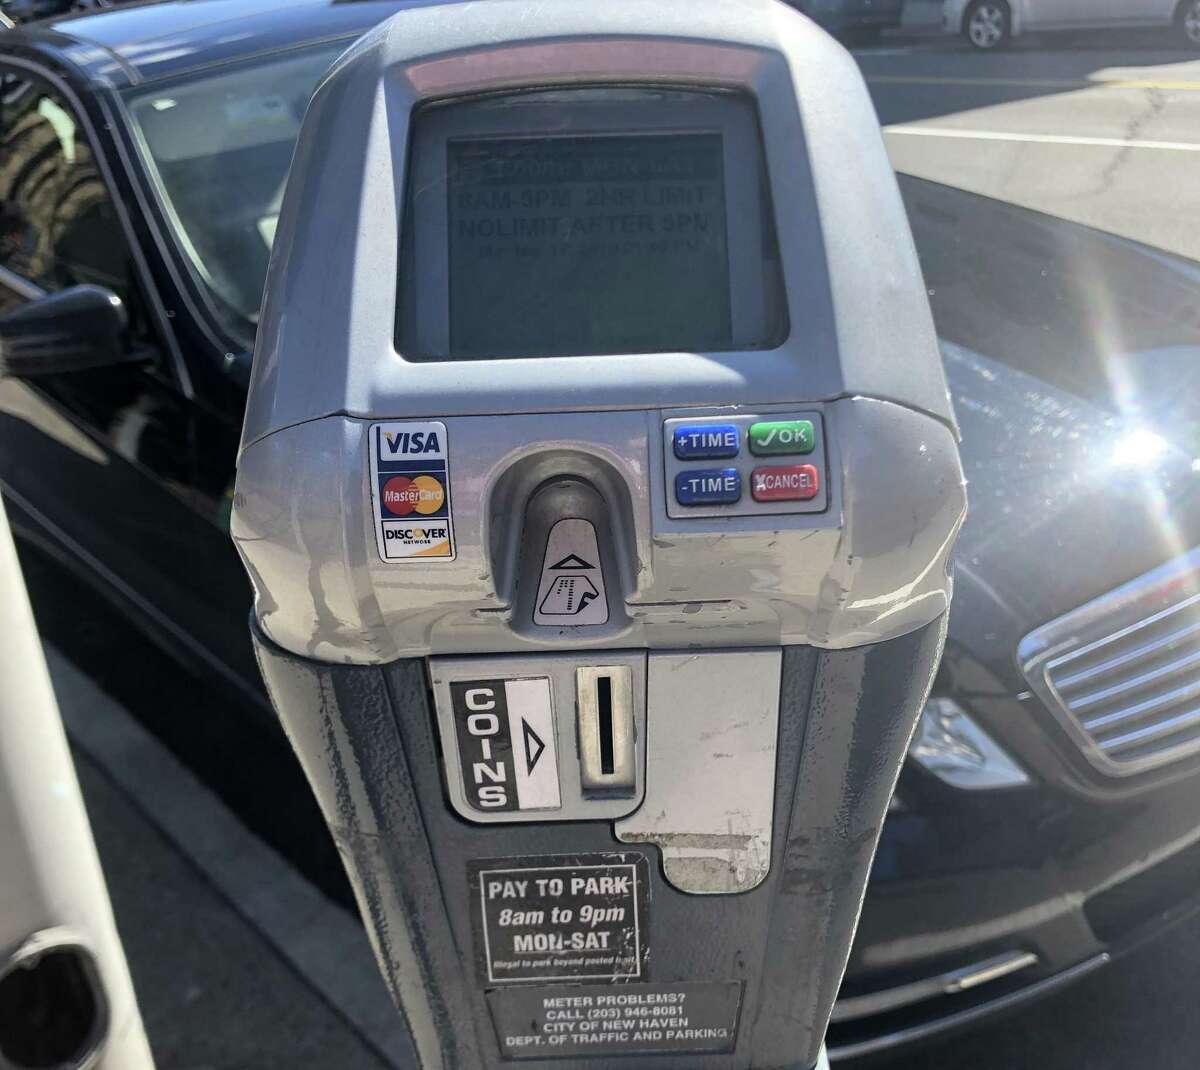 GROUP I: An expired meter will get you a $20 fine. Other penalties in this category include parking beyond posted time; meter repeater; occupying 2 spaces; parking away from curb; 72-hour parking; and commercial vehicle in residential area.